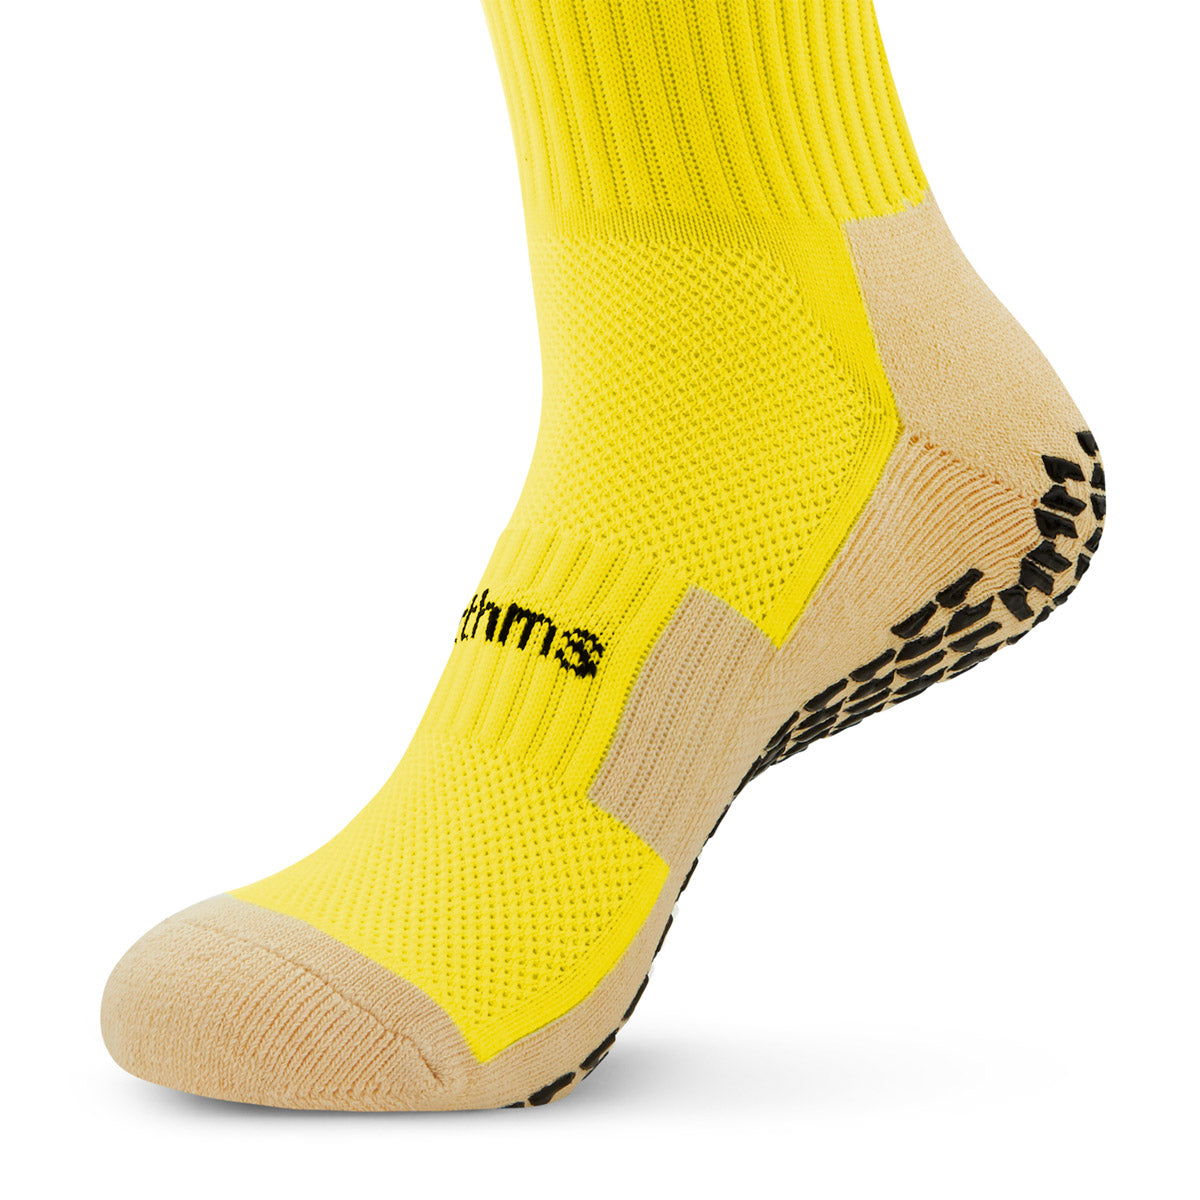 Yellow Grip Socks - Used By Pro Athletes Across The Globe